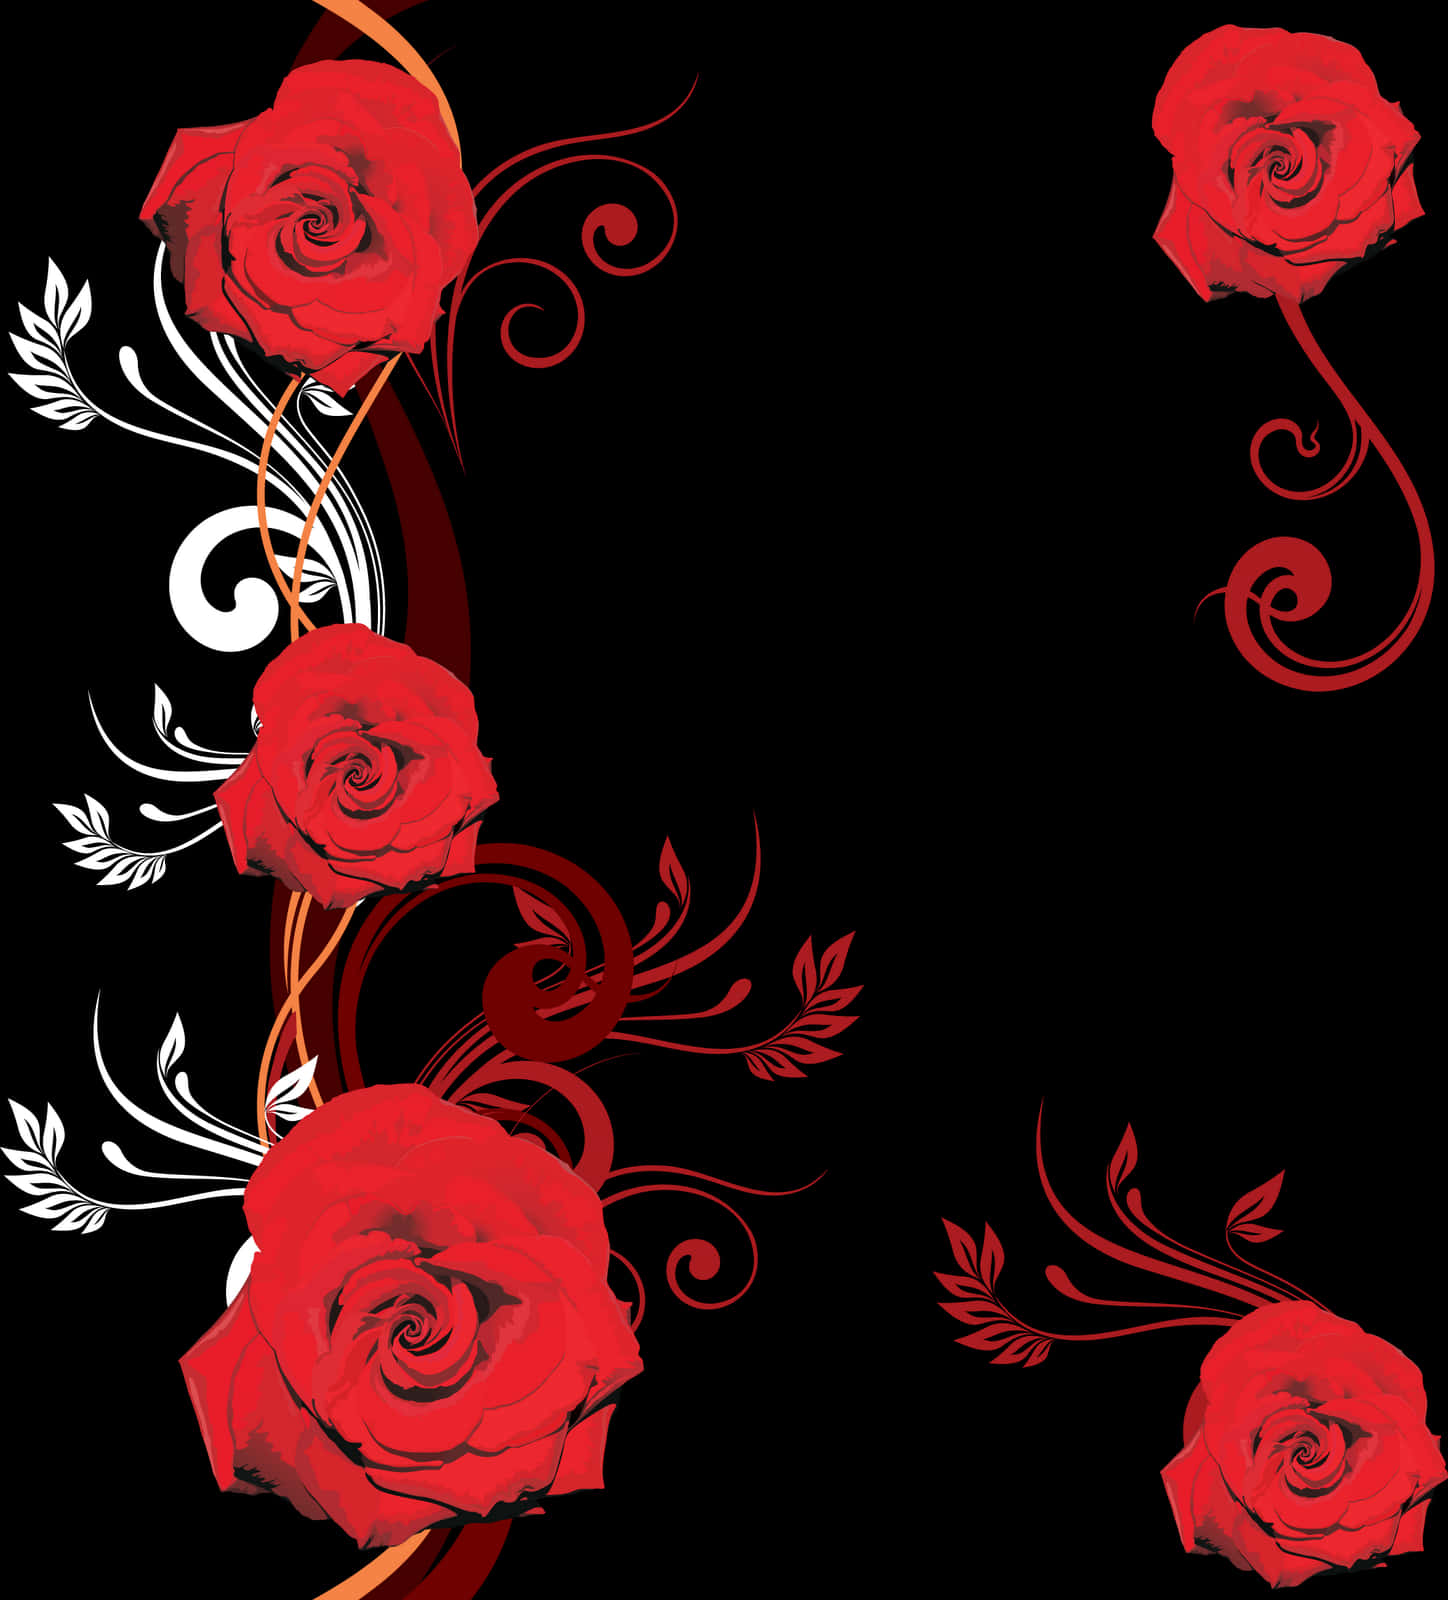 A Black Background With Red Roses And White Swirls